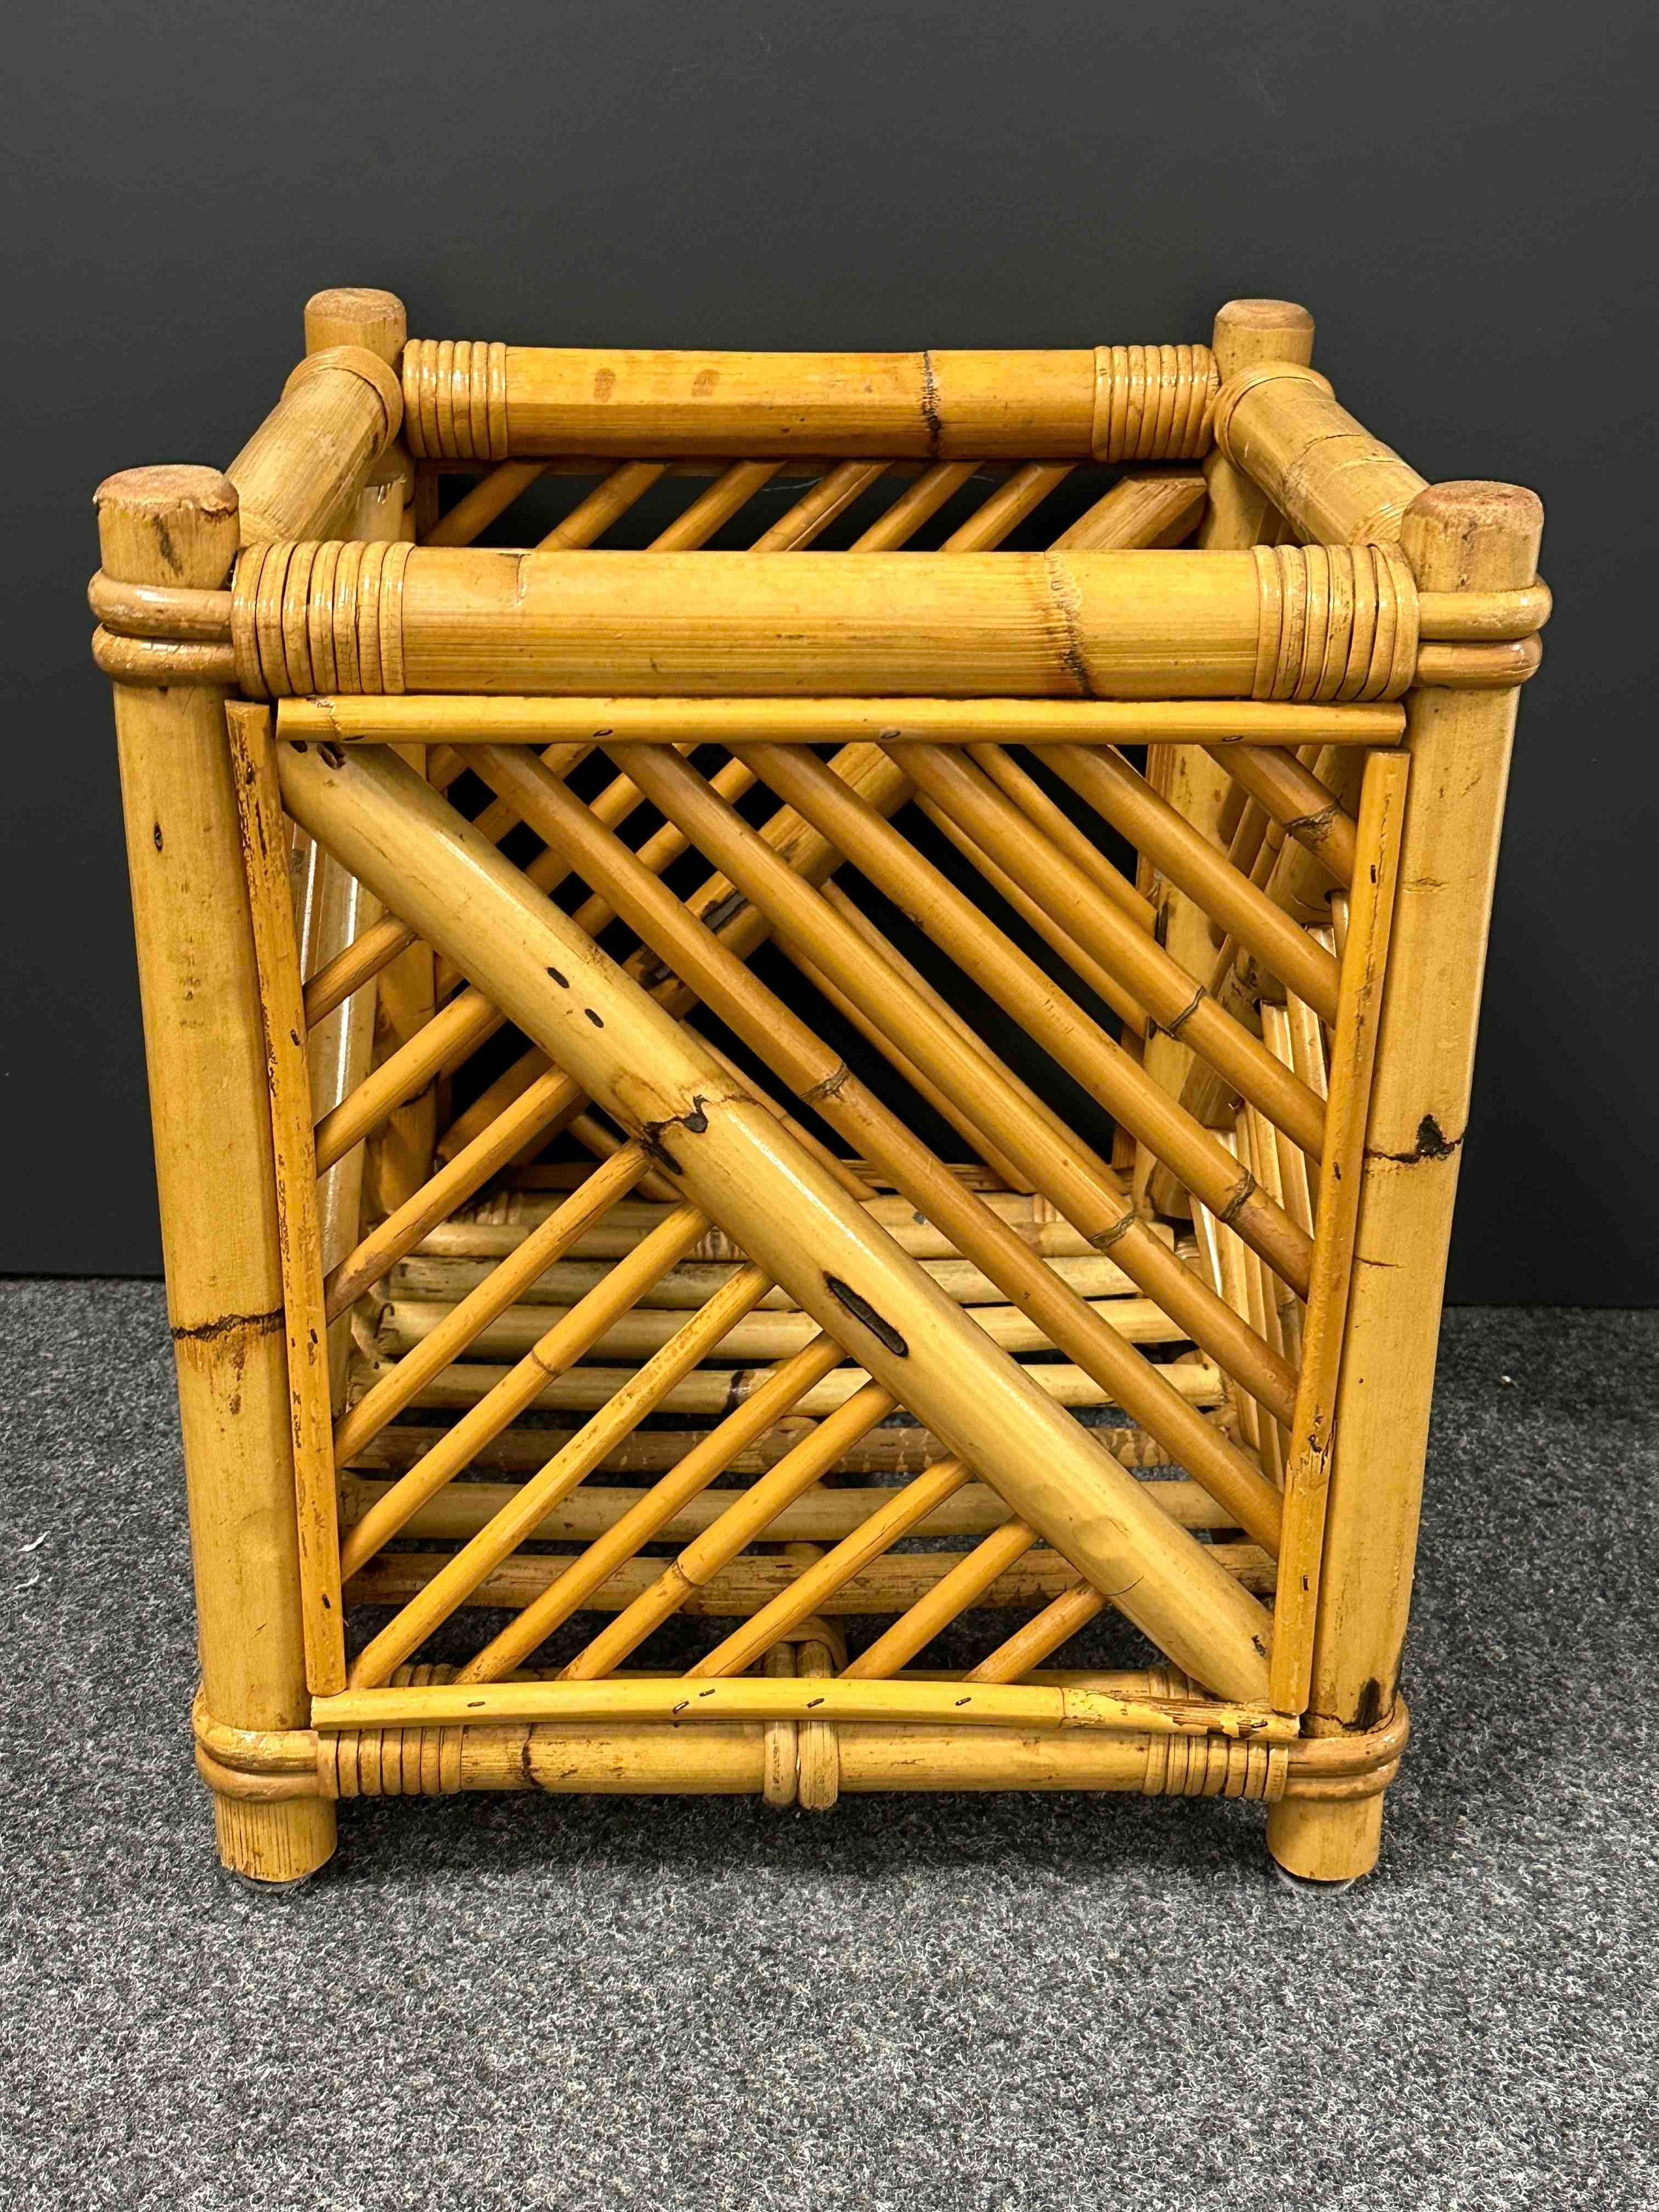 Italian Vivai Del Sud Bamboo Wicker Vintage Pot Cache Plant Holder or Waist Basket 1970s For Sale